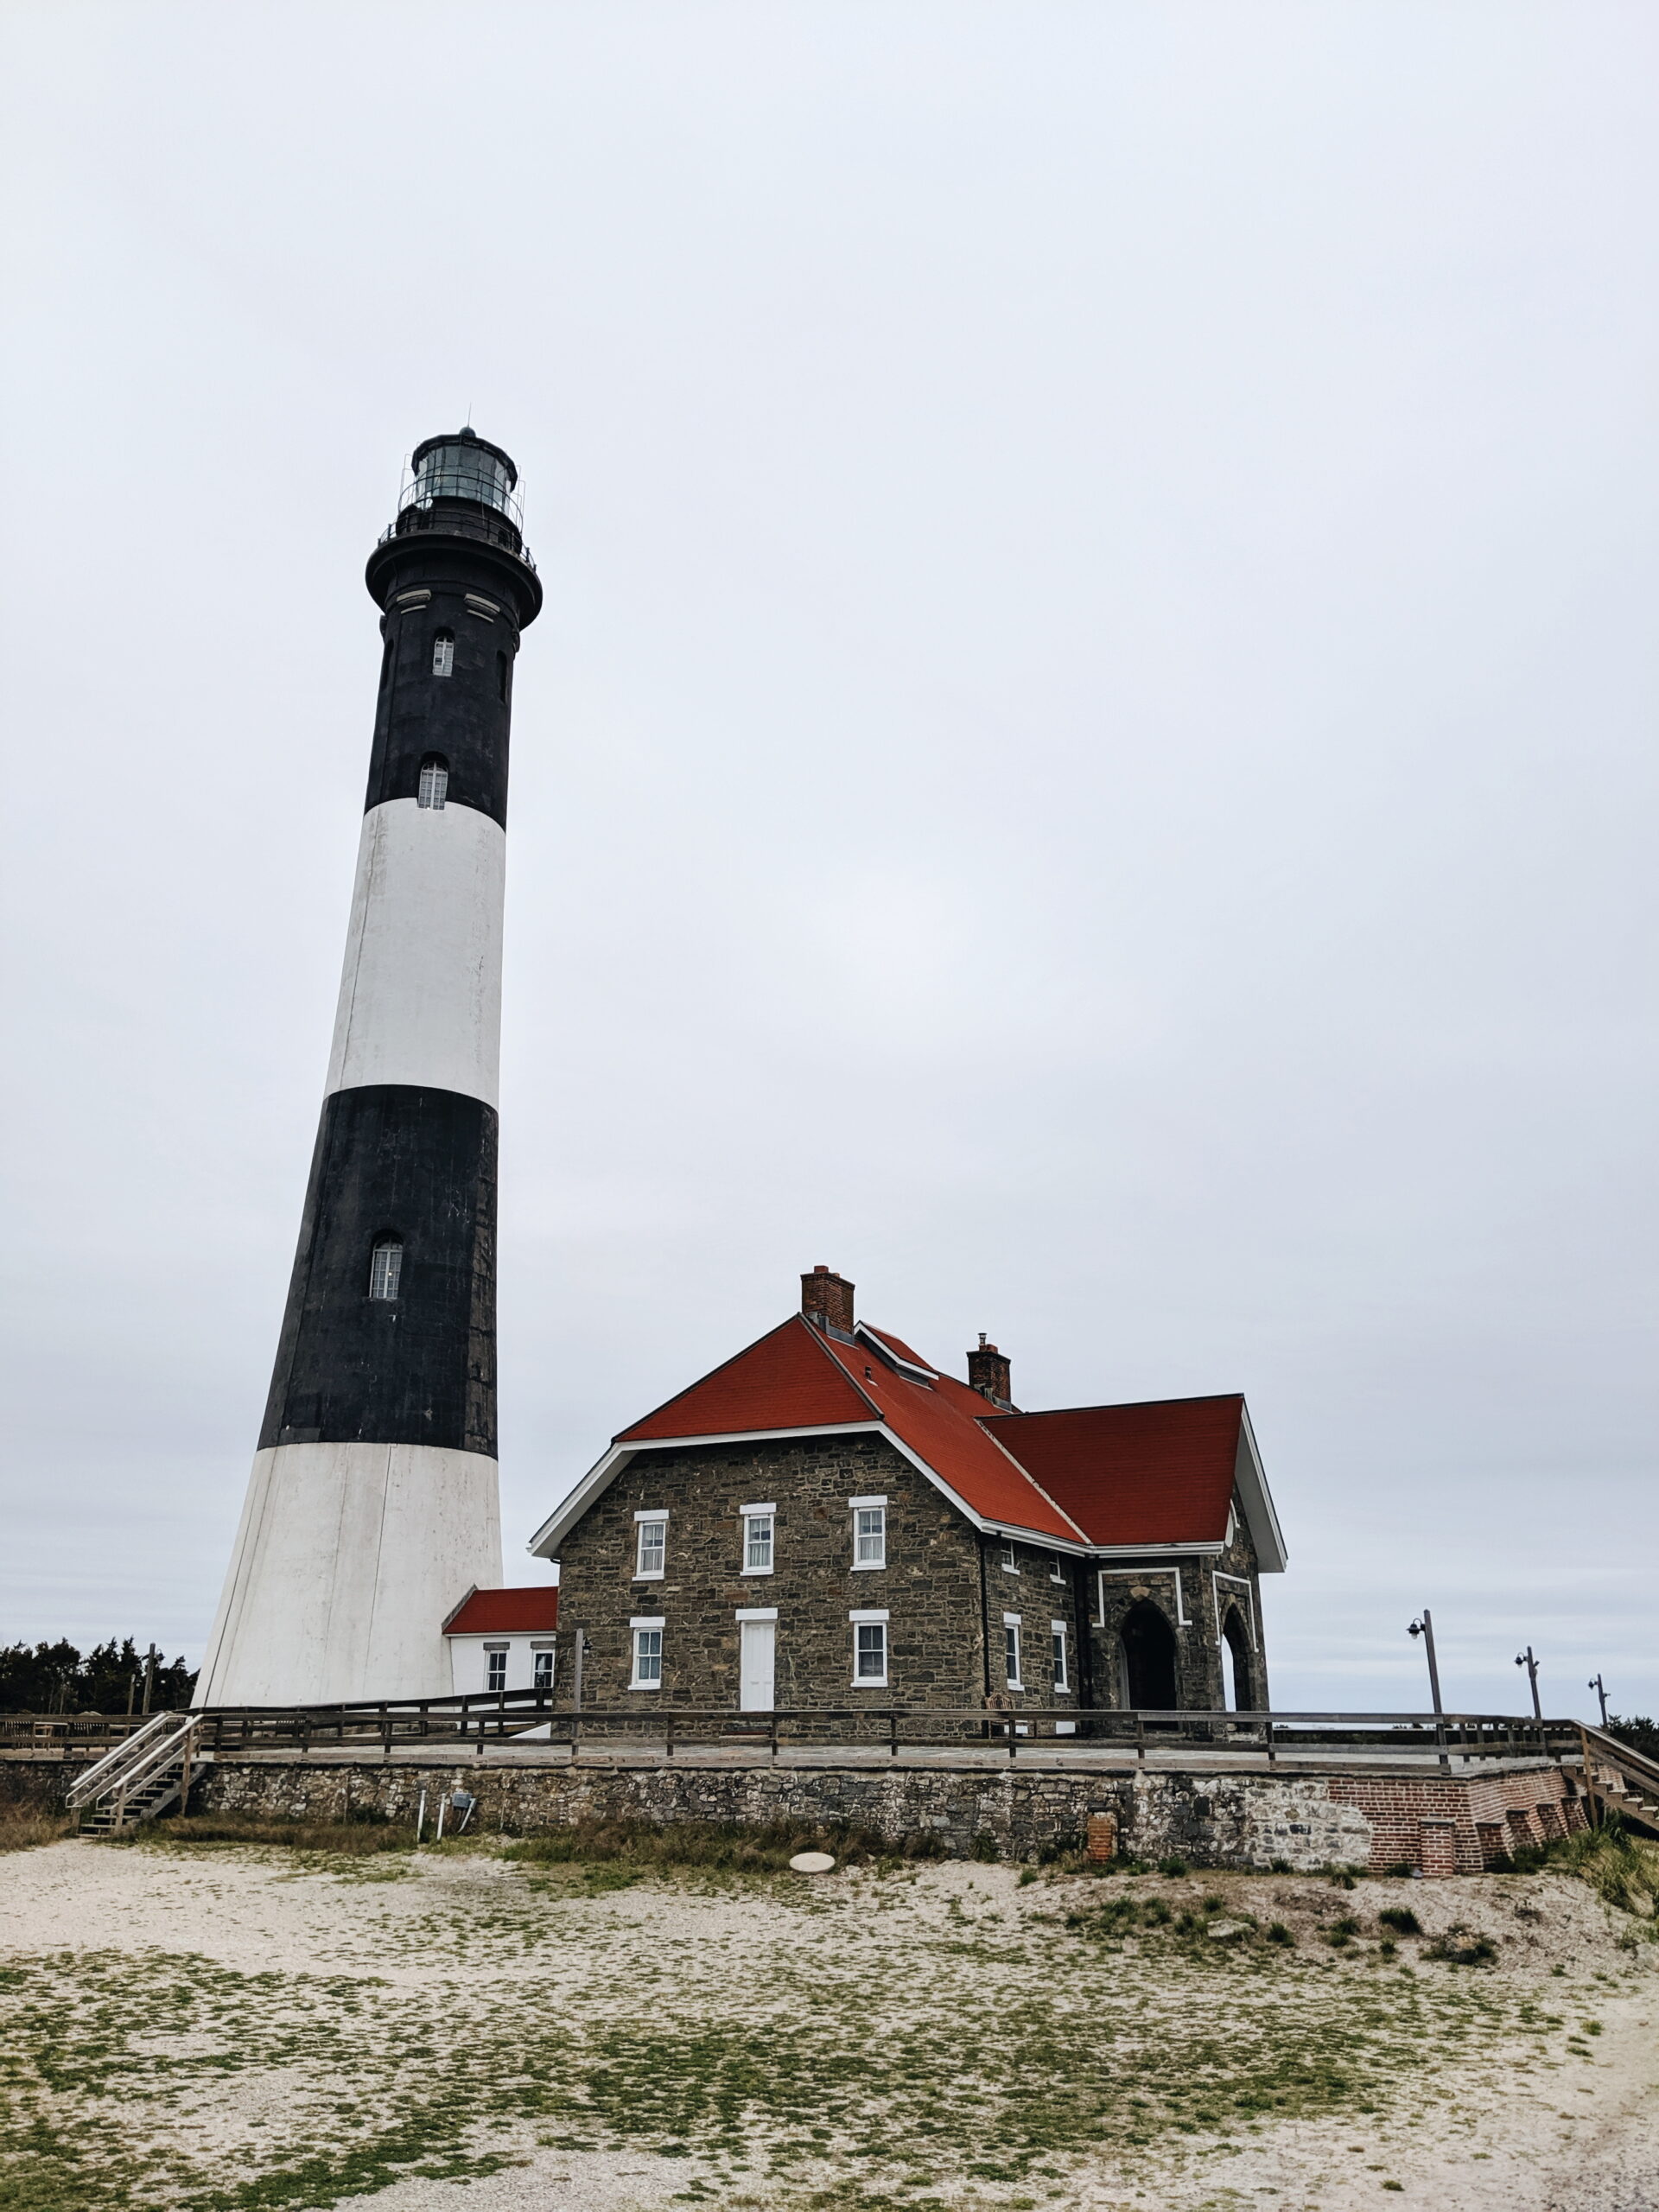 Fire Island Lighthouse with a small museum below